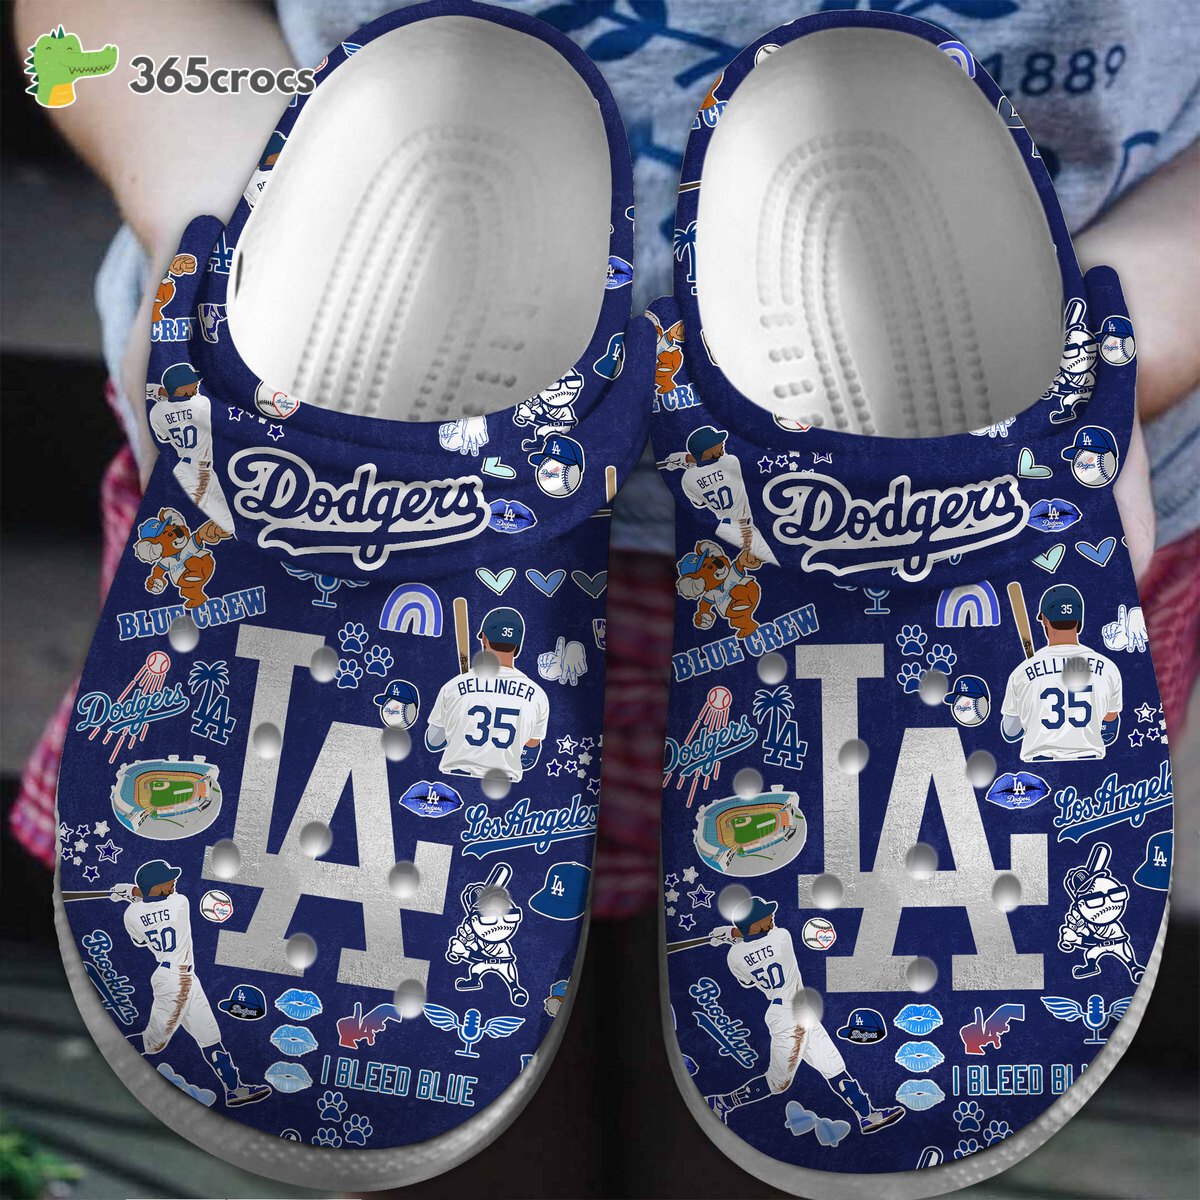 Los Angeles Dodgers MLB Fans’ Comfortable Crocss Clogs Shoes Series Collection New